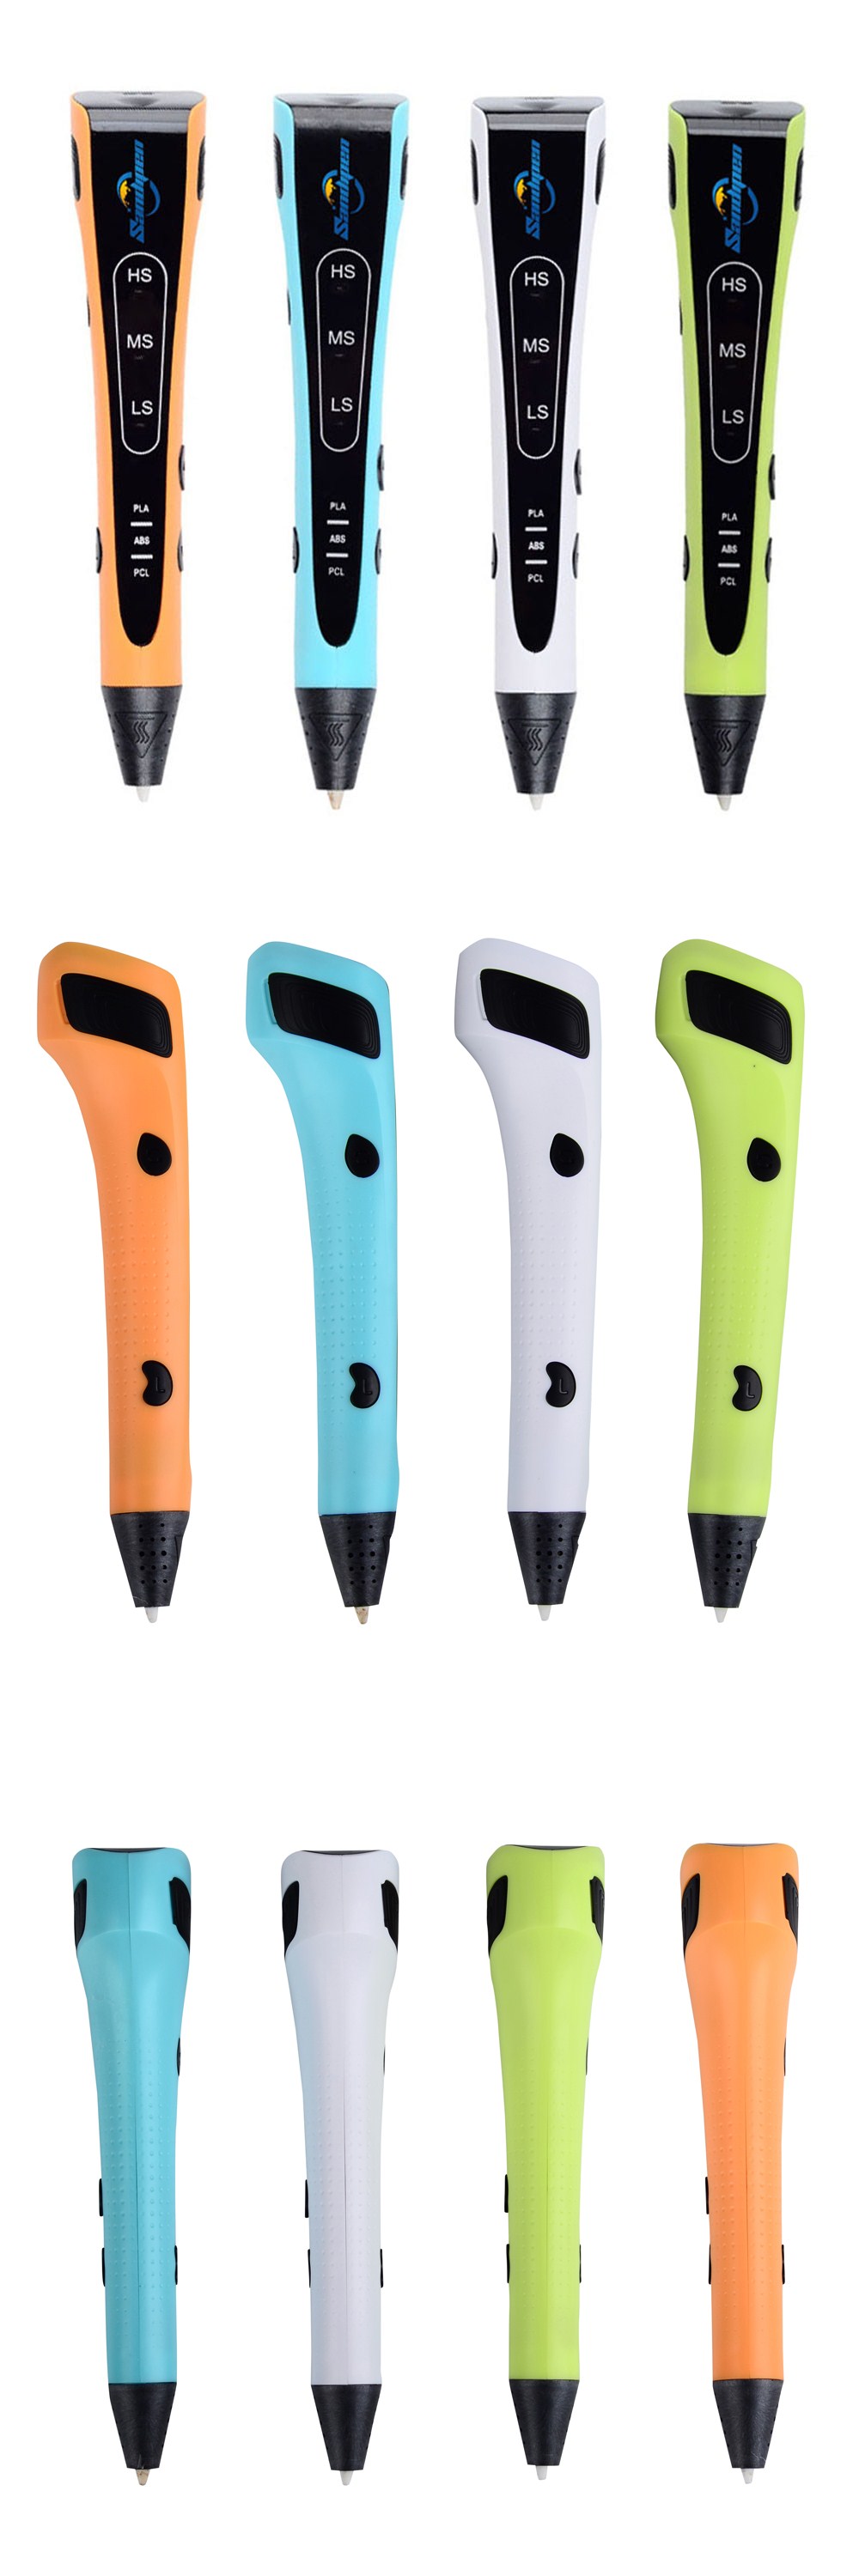 Orange/Blue/Green/White110-240V 3D Printing Pen for ABS/PLA/PCL Filament Support Adjustable Speed 24